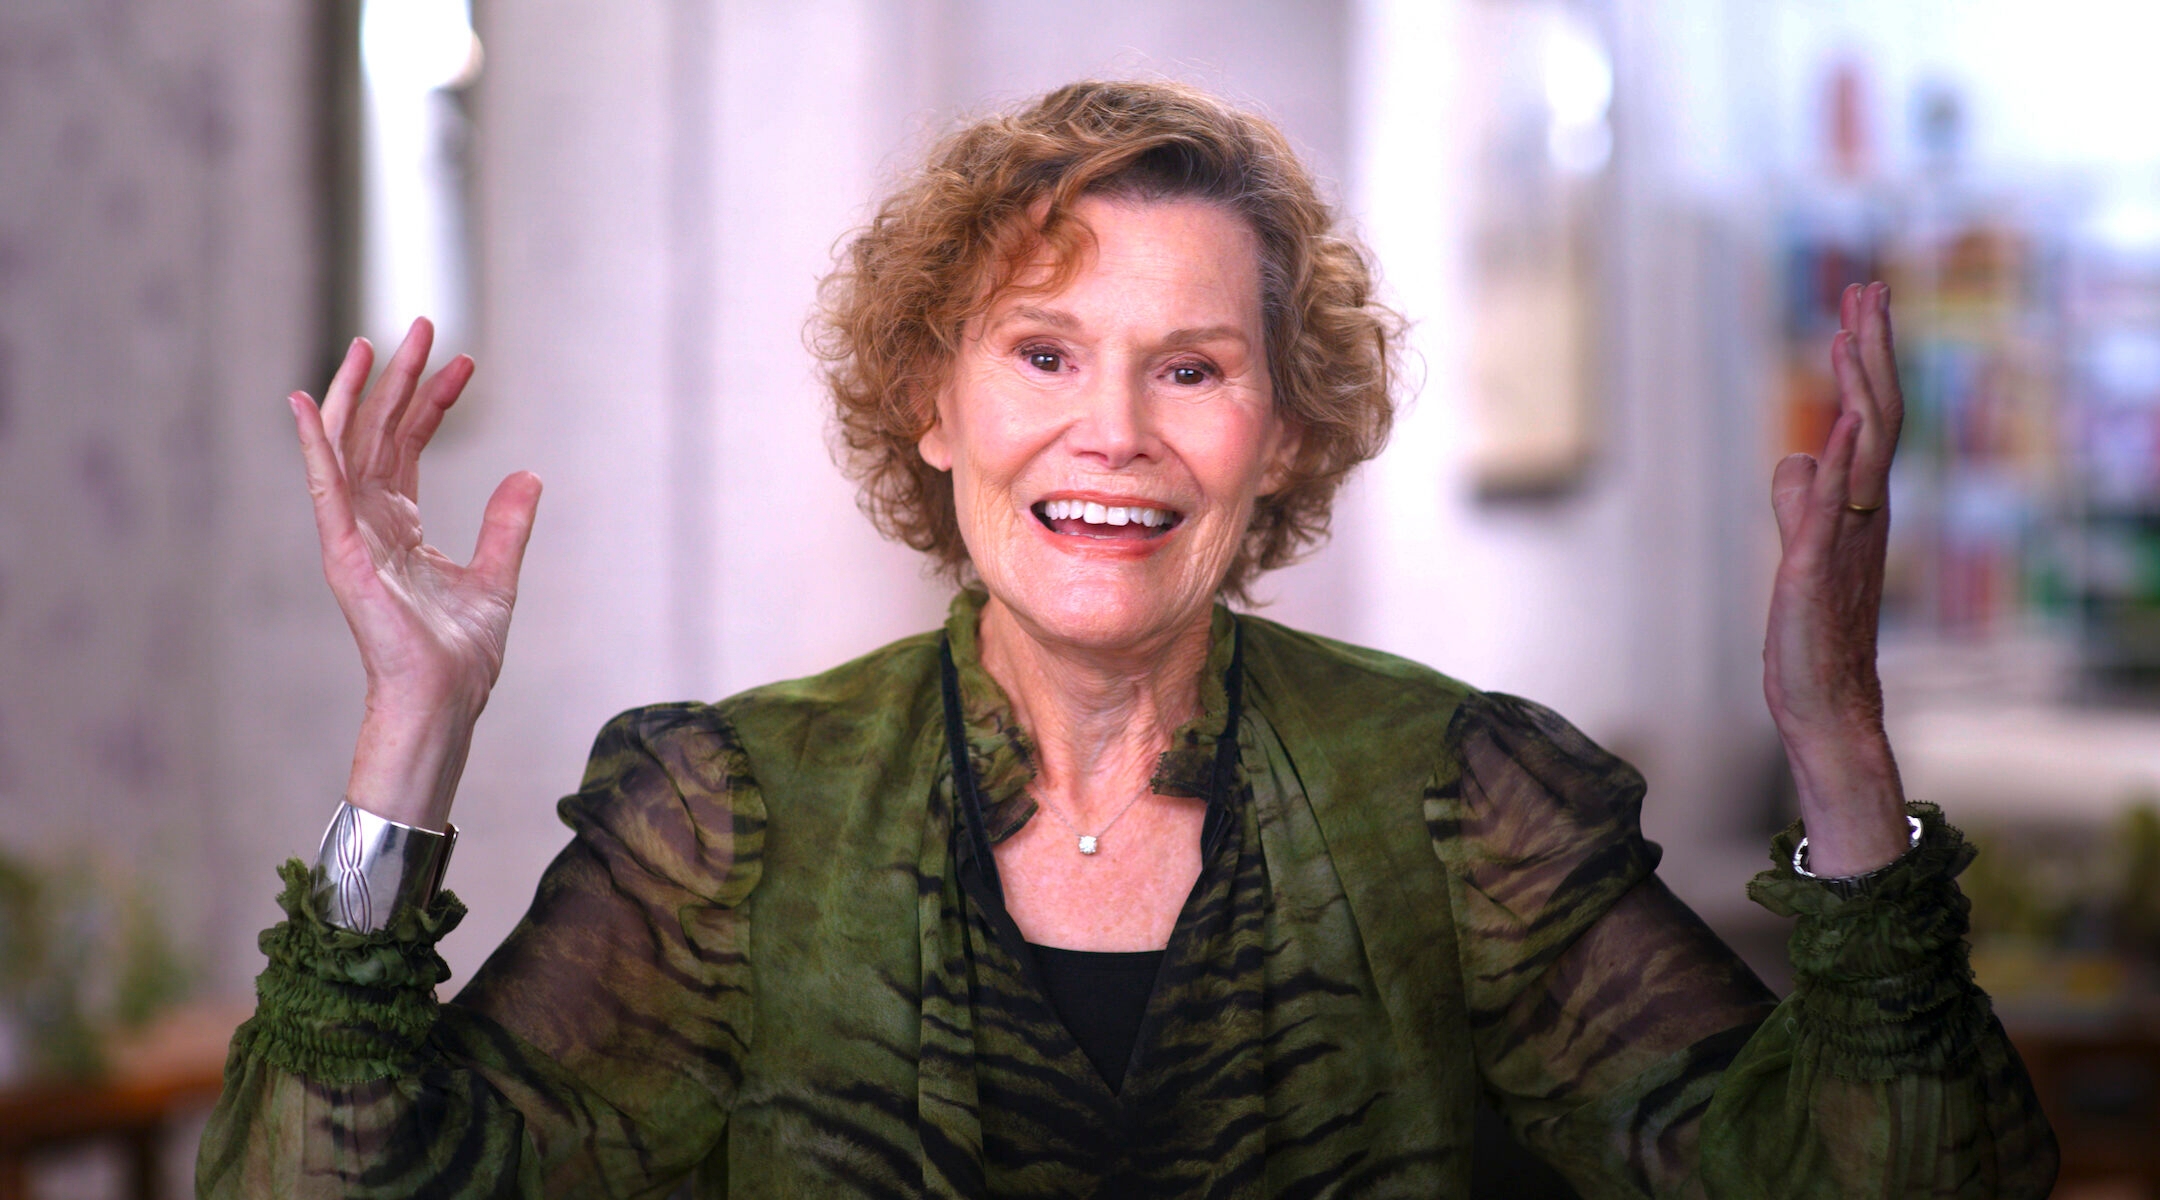 Judy Blume seen in the documentary "Judy Blume Forever."